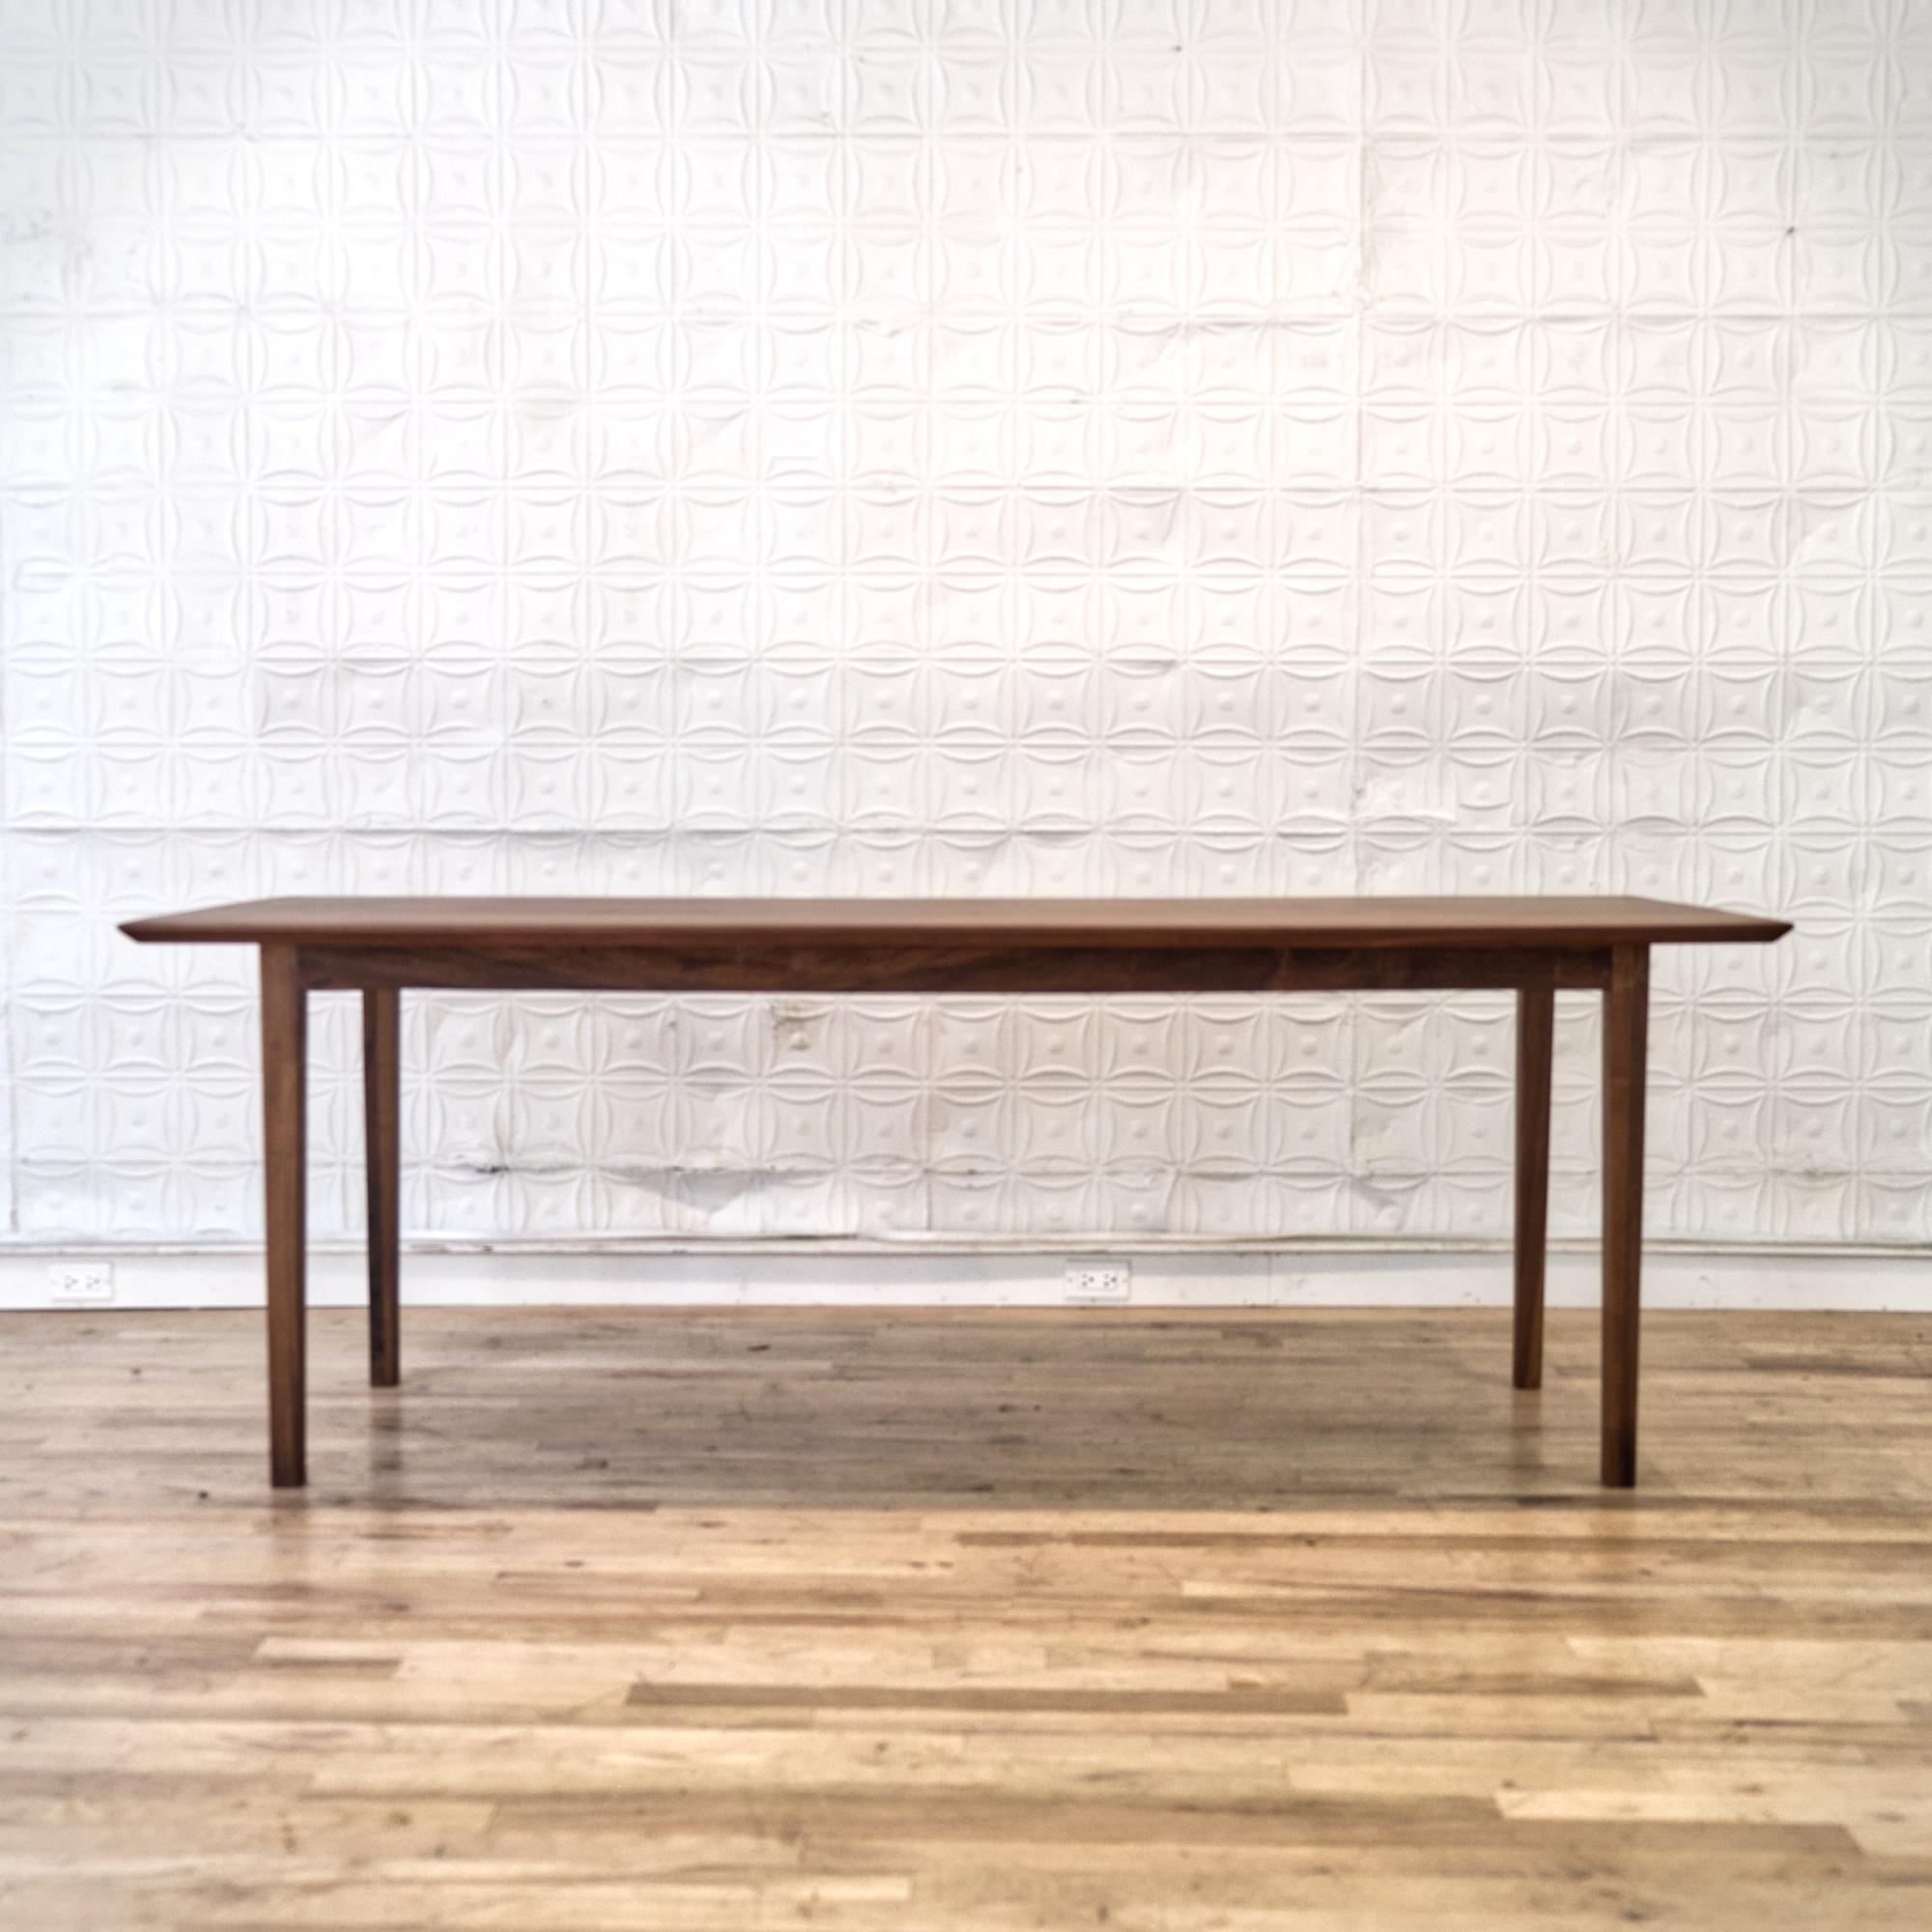 This molten grain walnut table spans in magical chamfered edges.
Handcrafted in solid walnut with tapered legs, a perfect setup for a dining table or large artist desk.
Benches are sold separately.


Own a figure-ground original!

Dimensions:

Depth